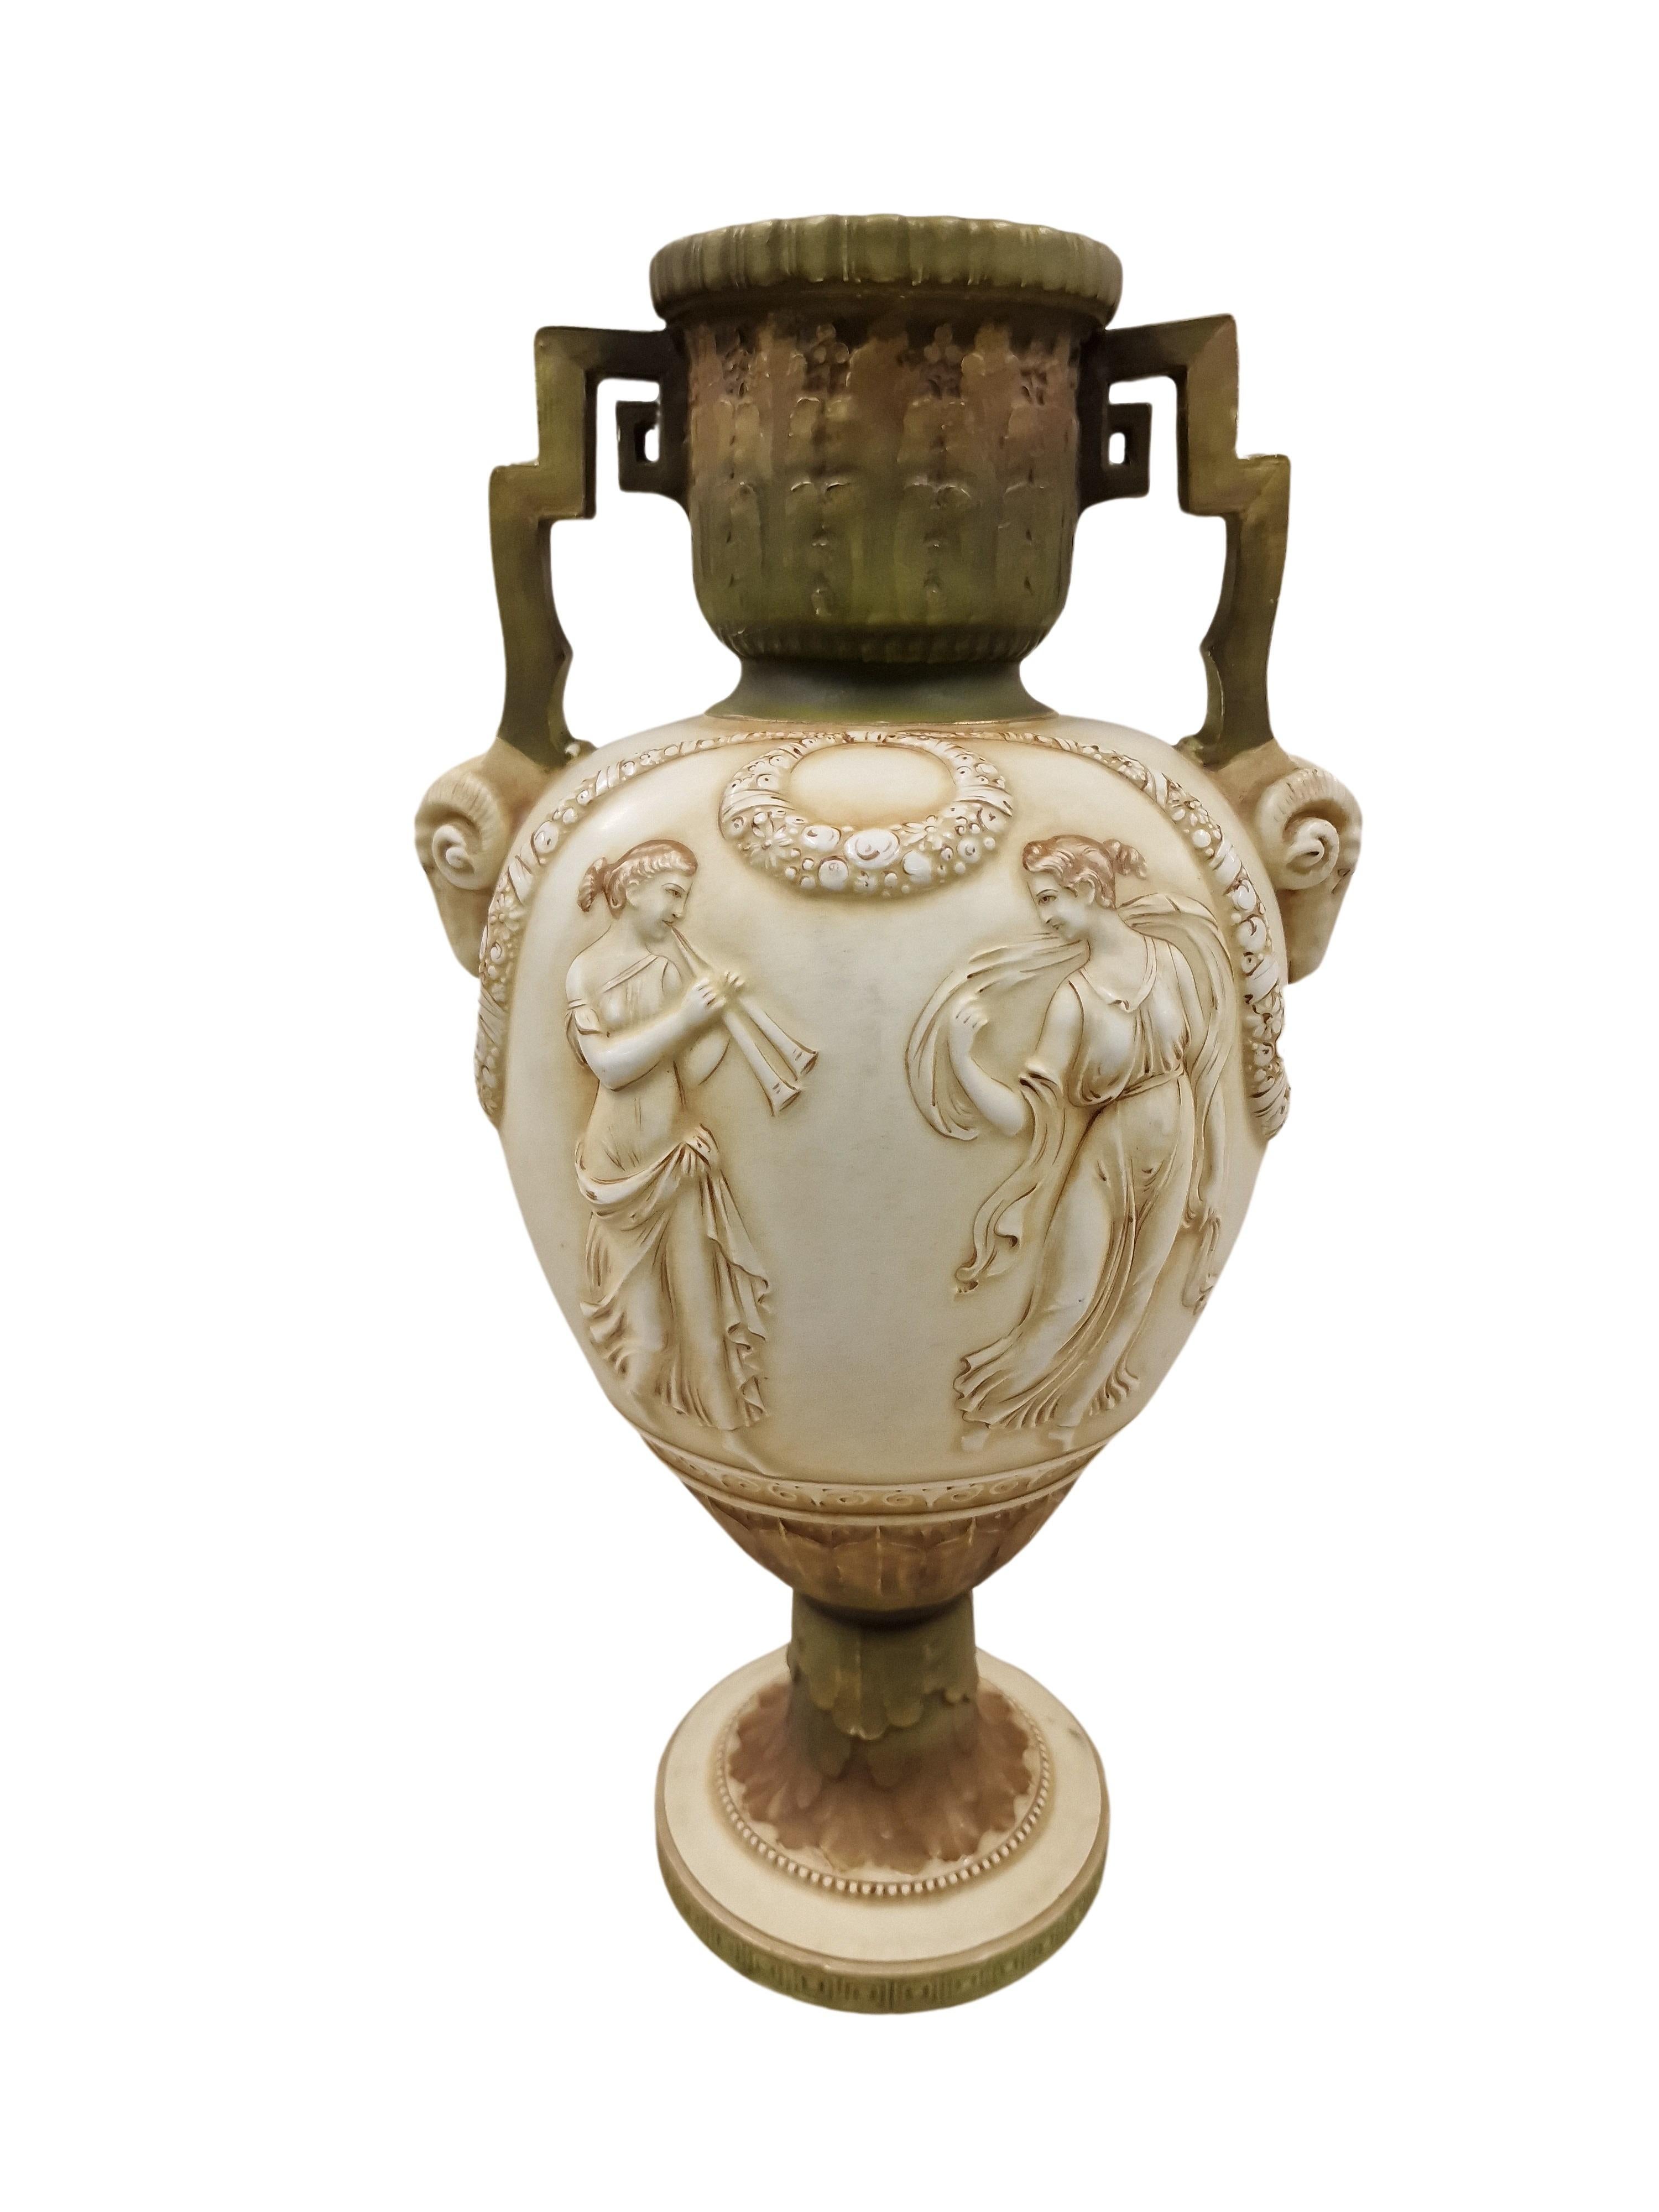 This stunning vase was made by Royal Vienna Porcelain, with support from Ernst Wahliss (1837 - 1900). The vase is in amphora shape, hand painted and has the early mark on the underside.

The porcelain vase is ivory colored with light green and brown